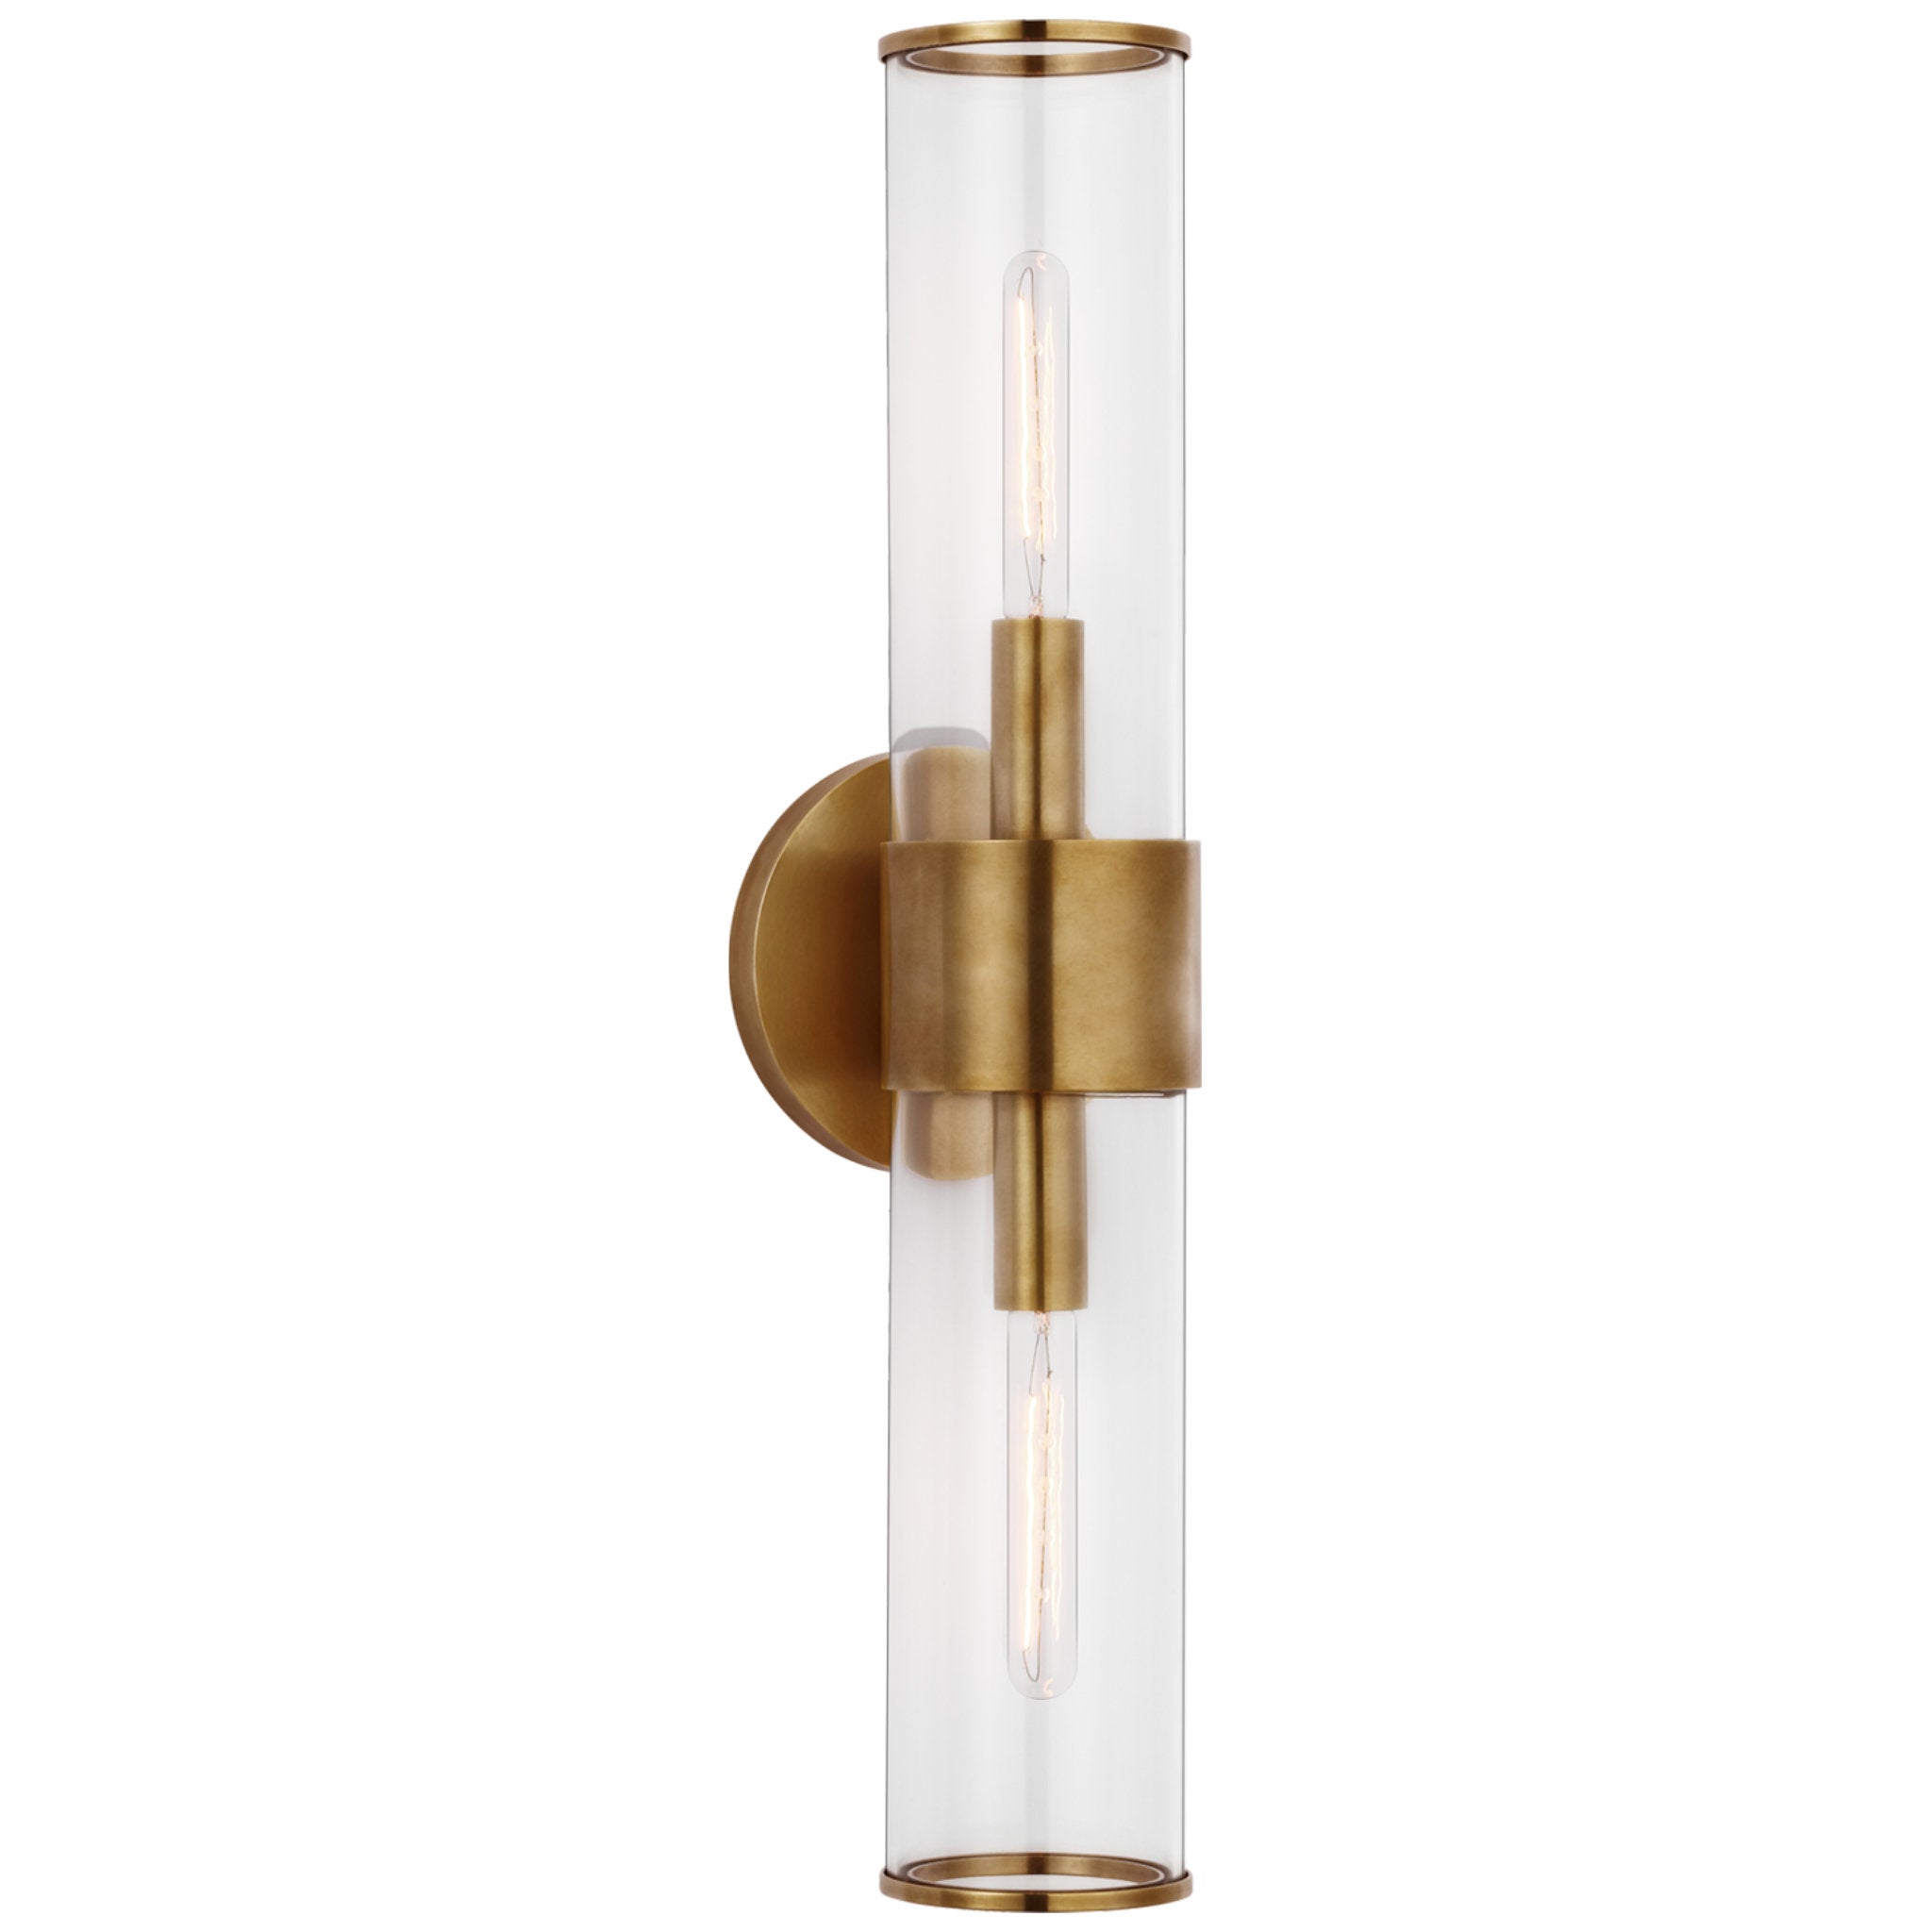 Kelly Wearstler Liaison Medium Sconce in Antique-Burnished Brass with Clear Glass